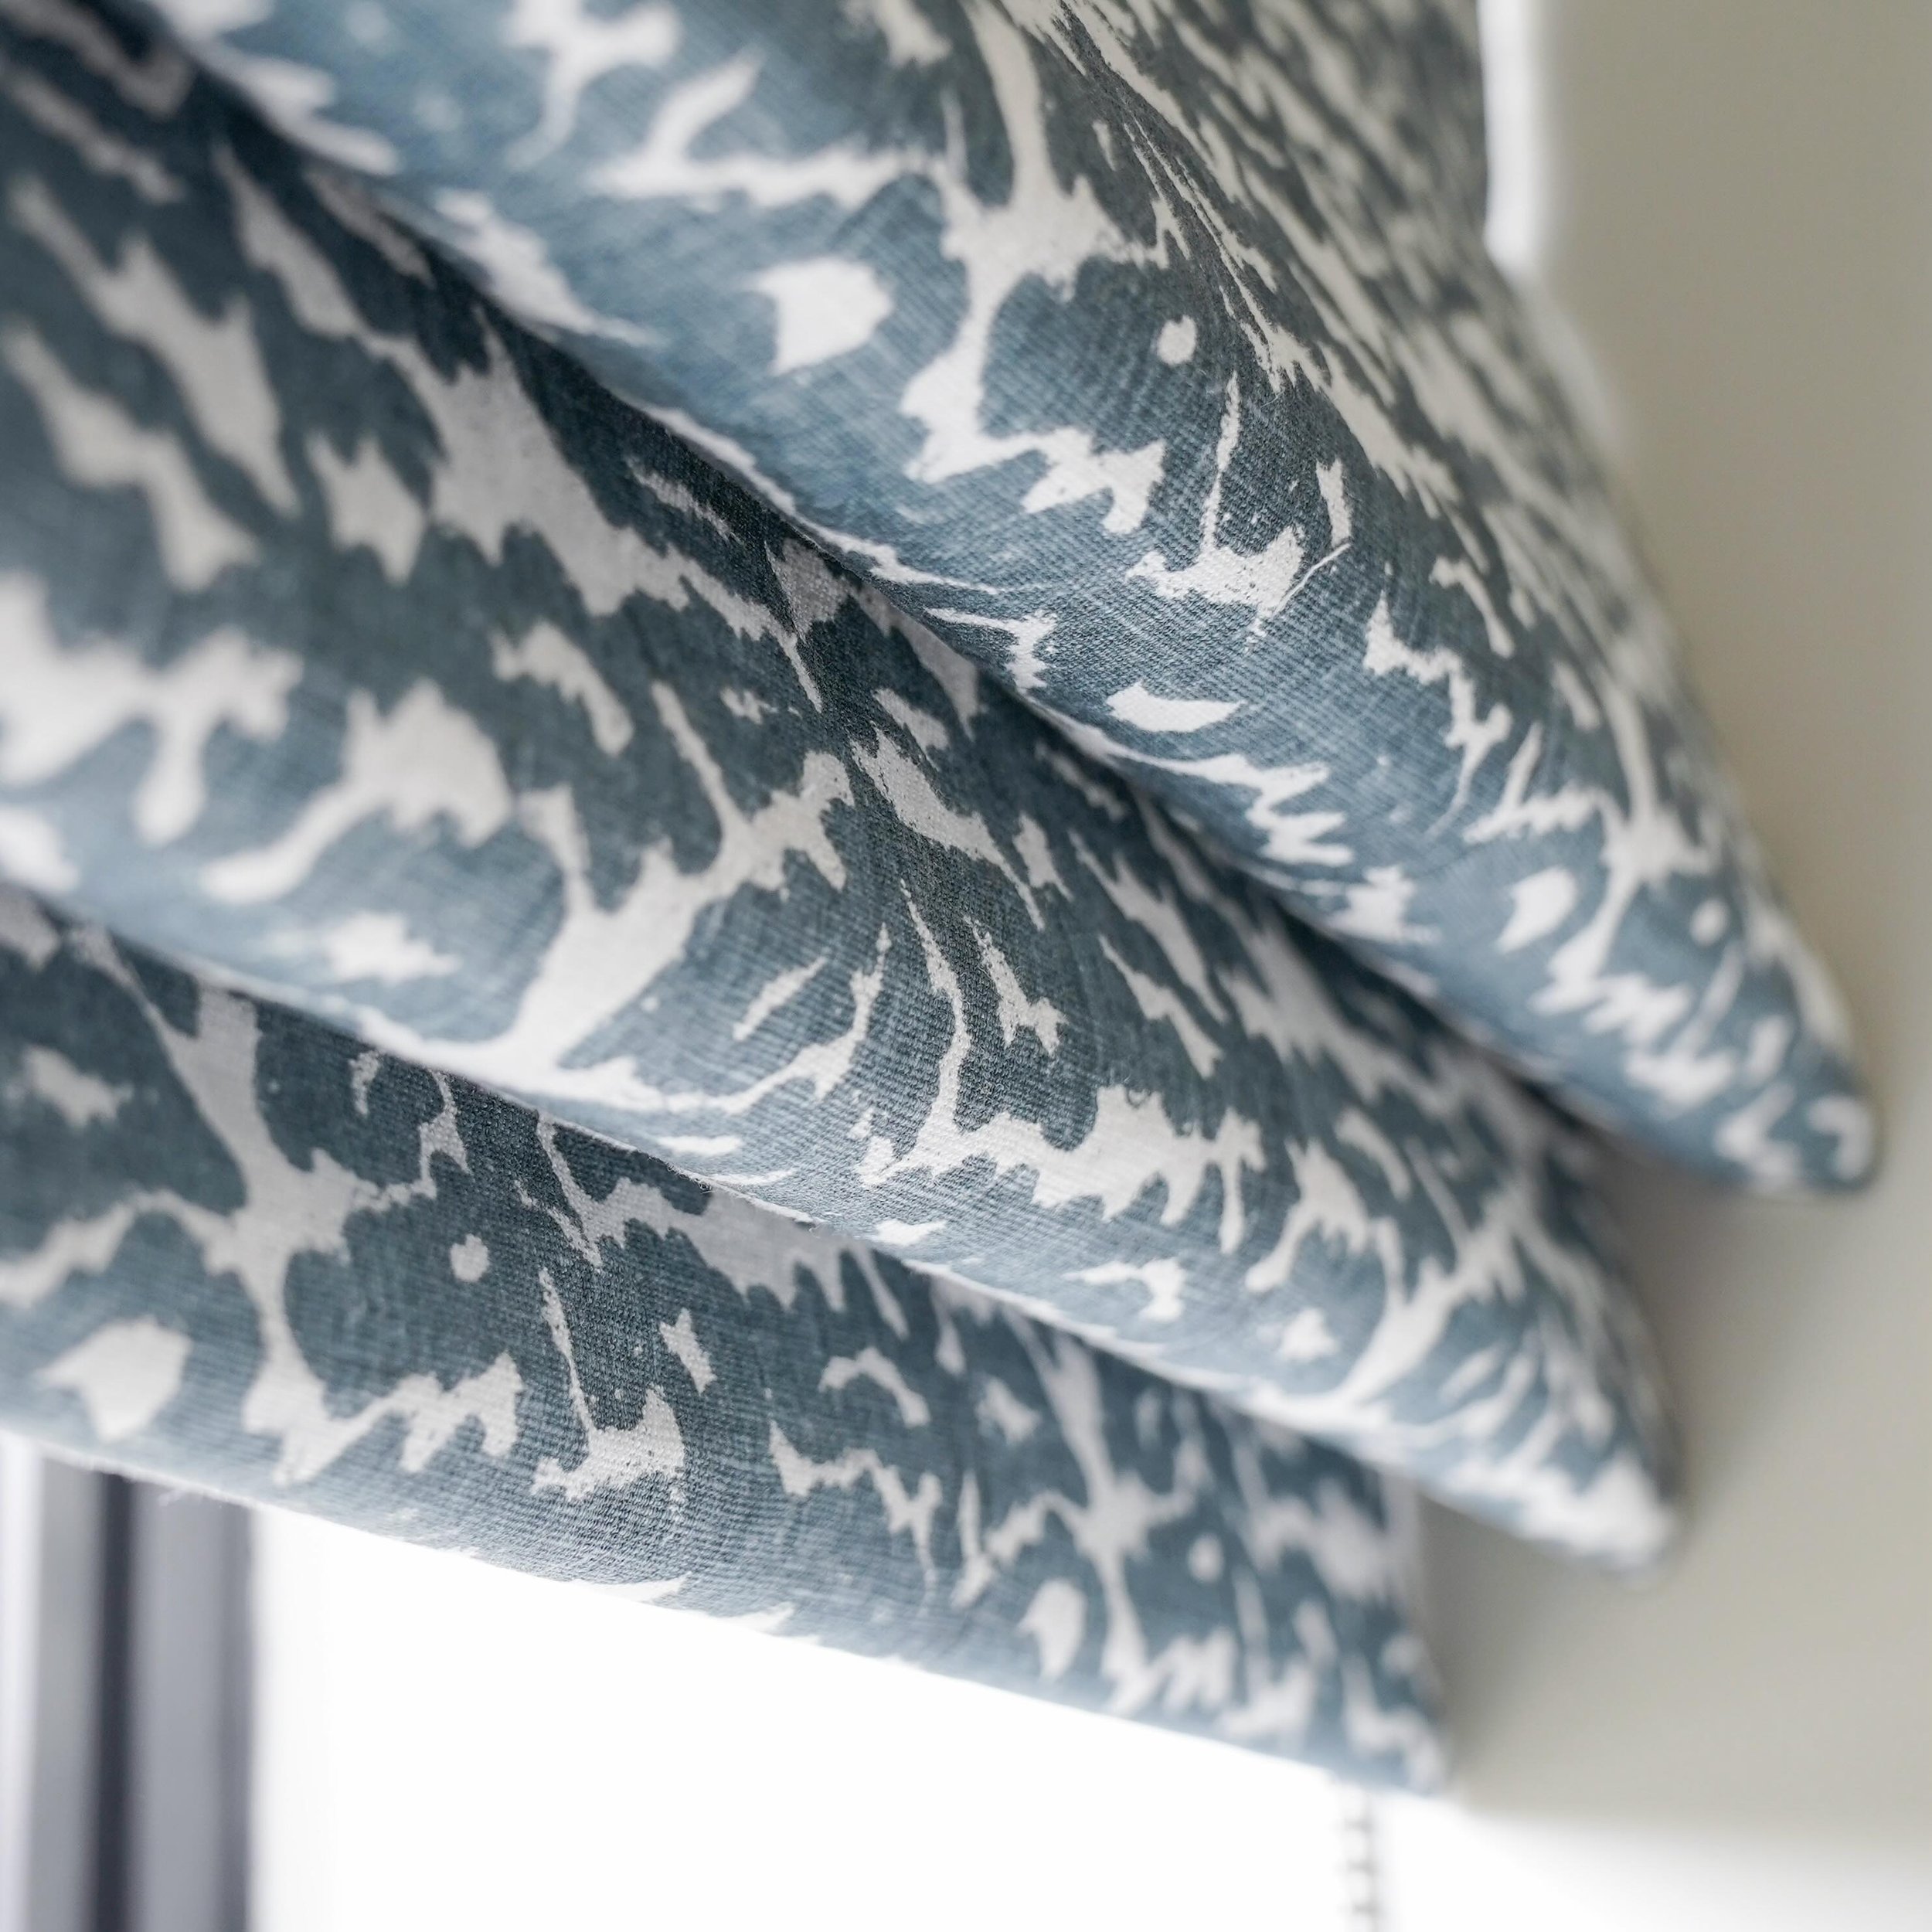 Soft and crisp all at the same time. Kay makes our fabrics into anything that is required. These blinds have been interlined and lined with a blackout lining as standard practice. Especially great for bedrooms this time of year.

@kayelizabethinterio